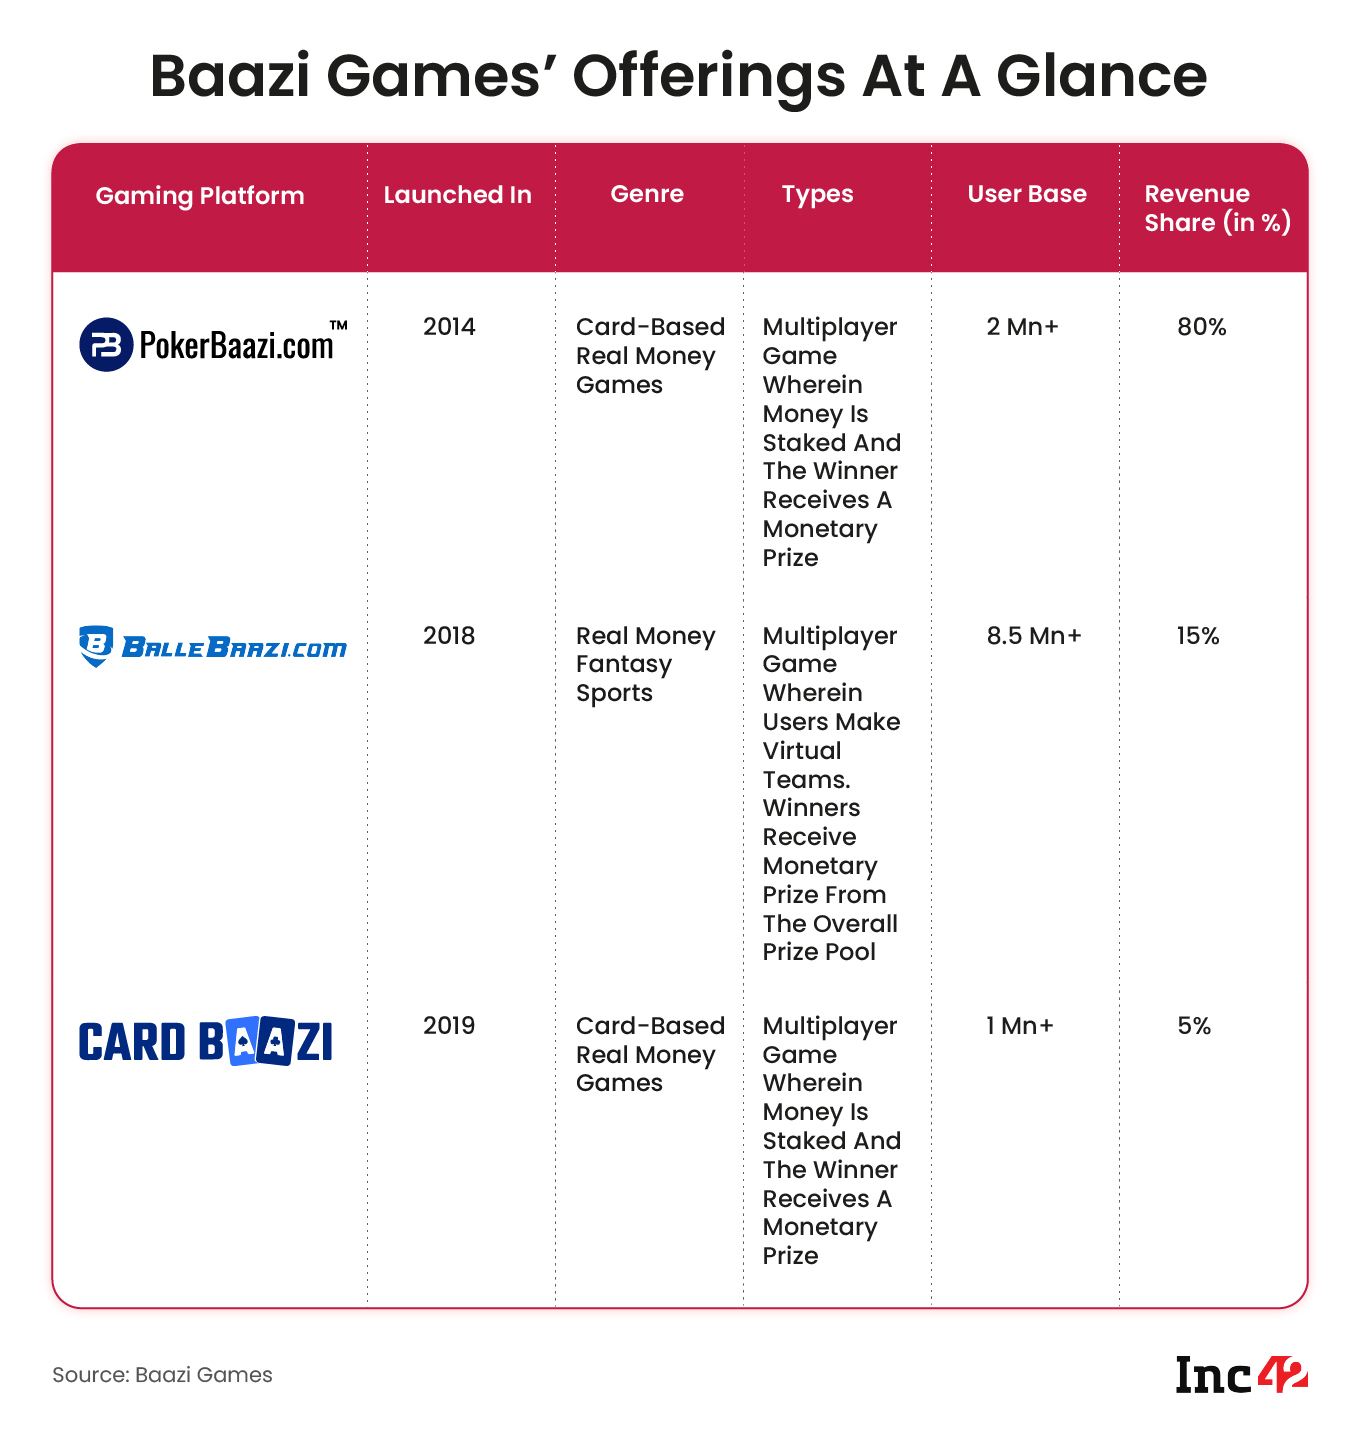 Baazi Games Offering at a Glance